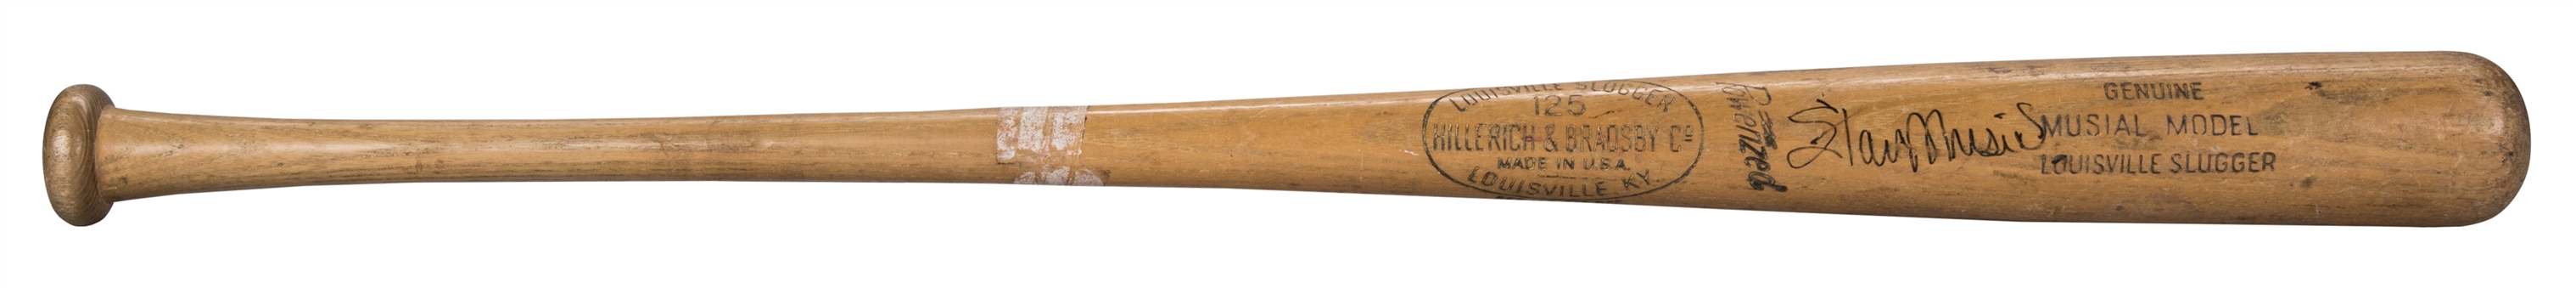 1961-63 Stan Musial Game Used and Signed Hillerich & Bradsby M159 Model Bat (PSA/DNA)